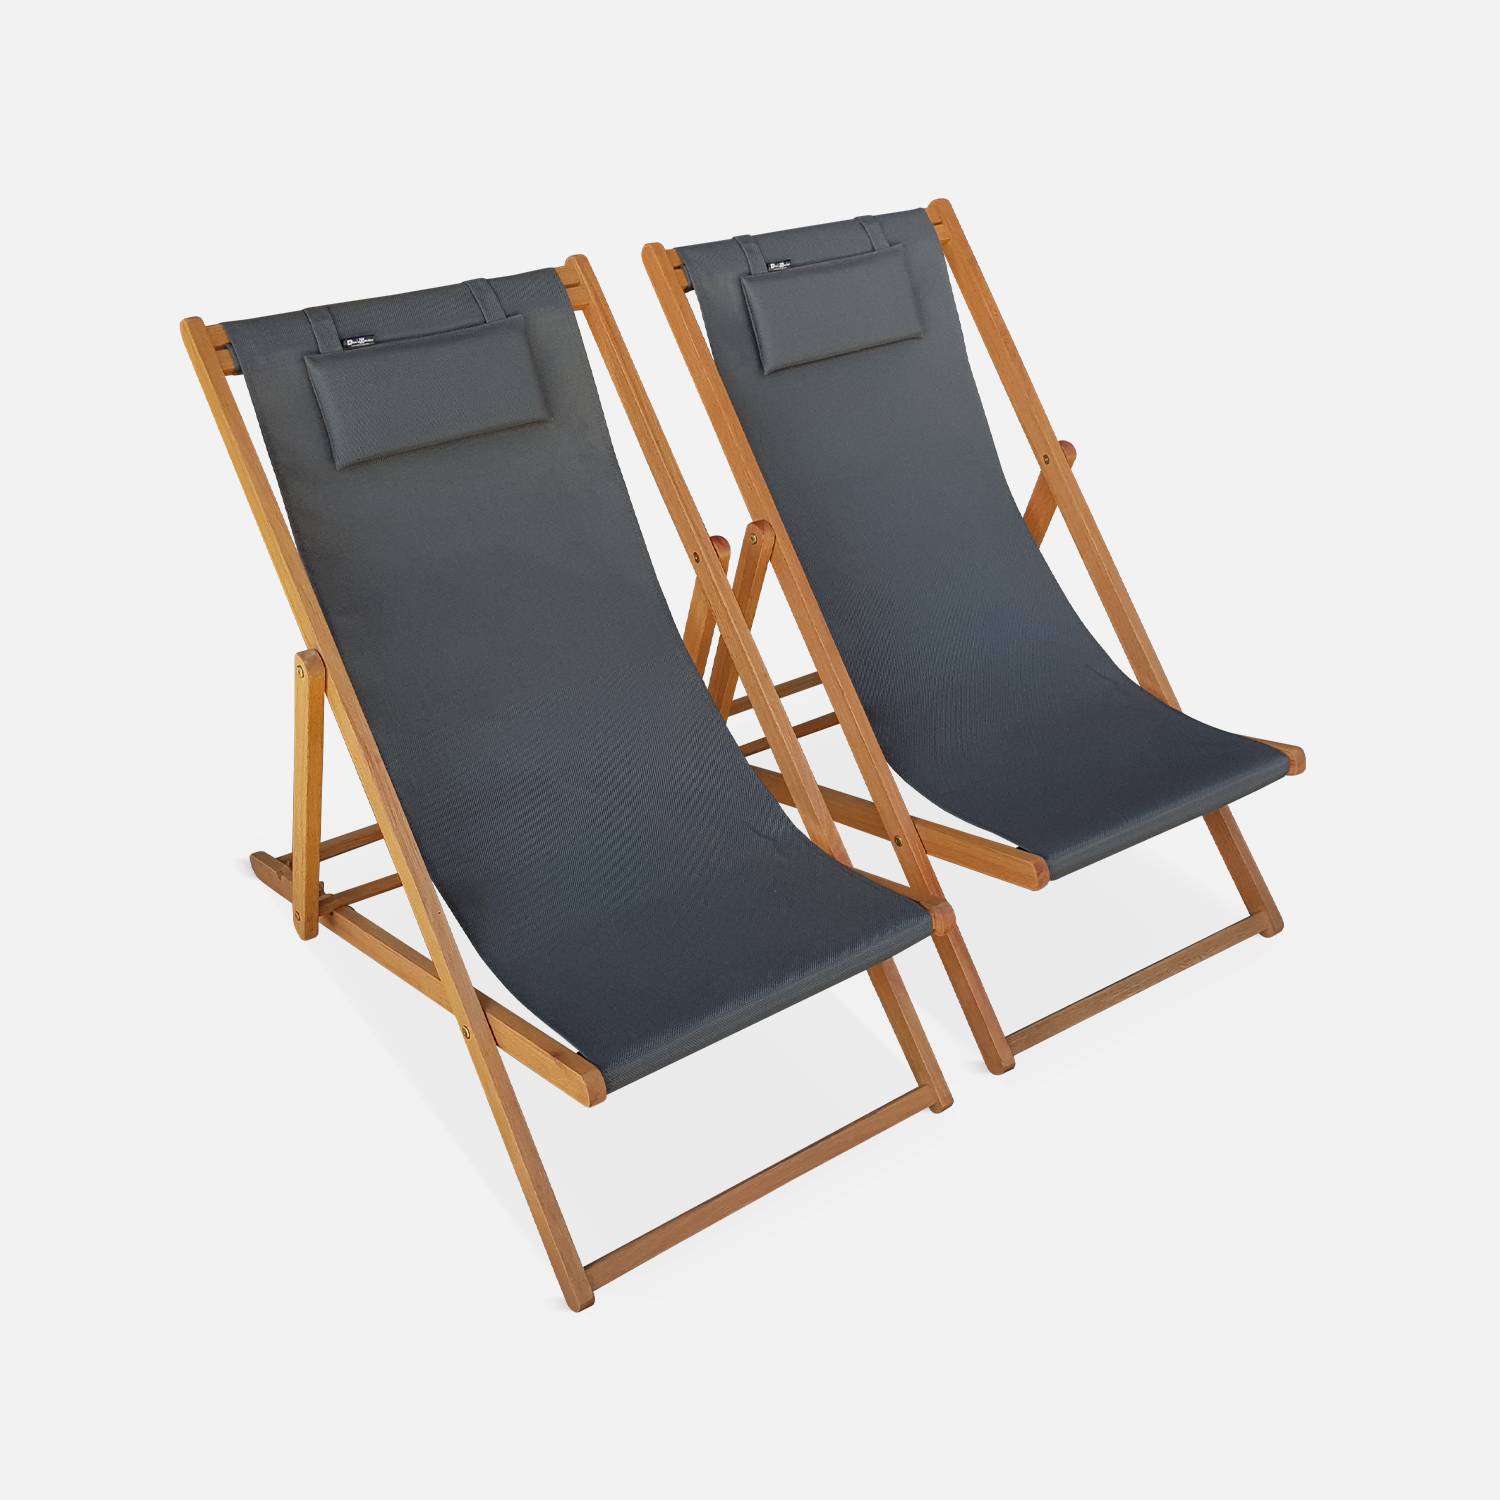 Pair of pre-oiled FSC eucalyptus deck chairs with headrest cushions - Creus - Wood/Anthracite,sweeek,Photo2